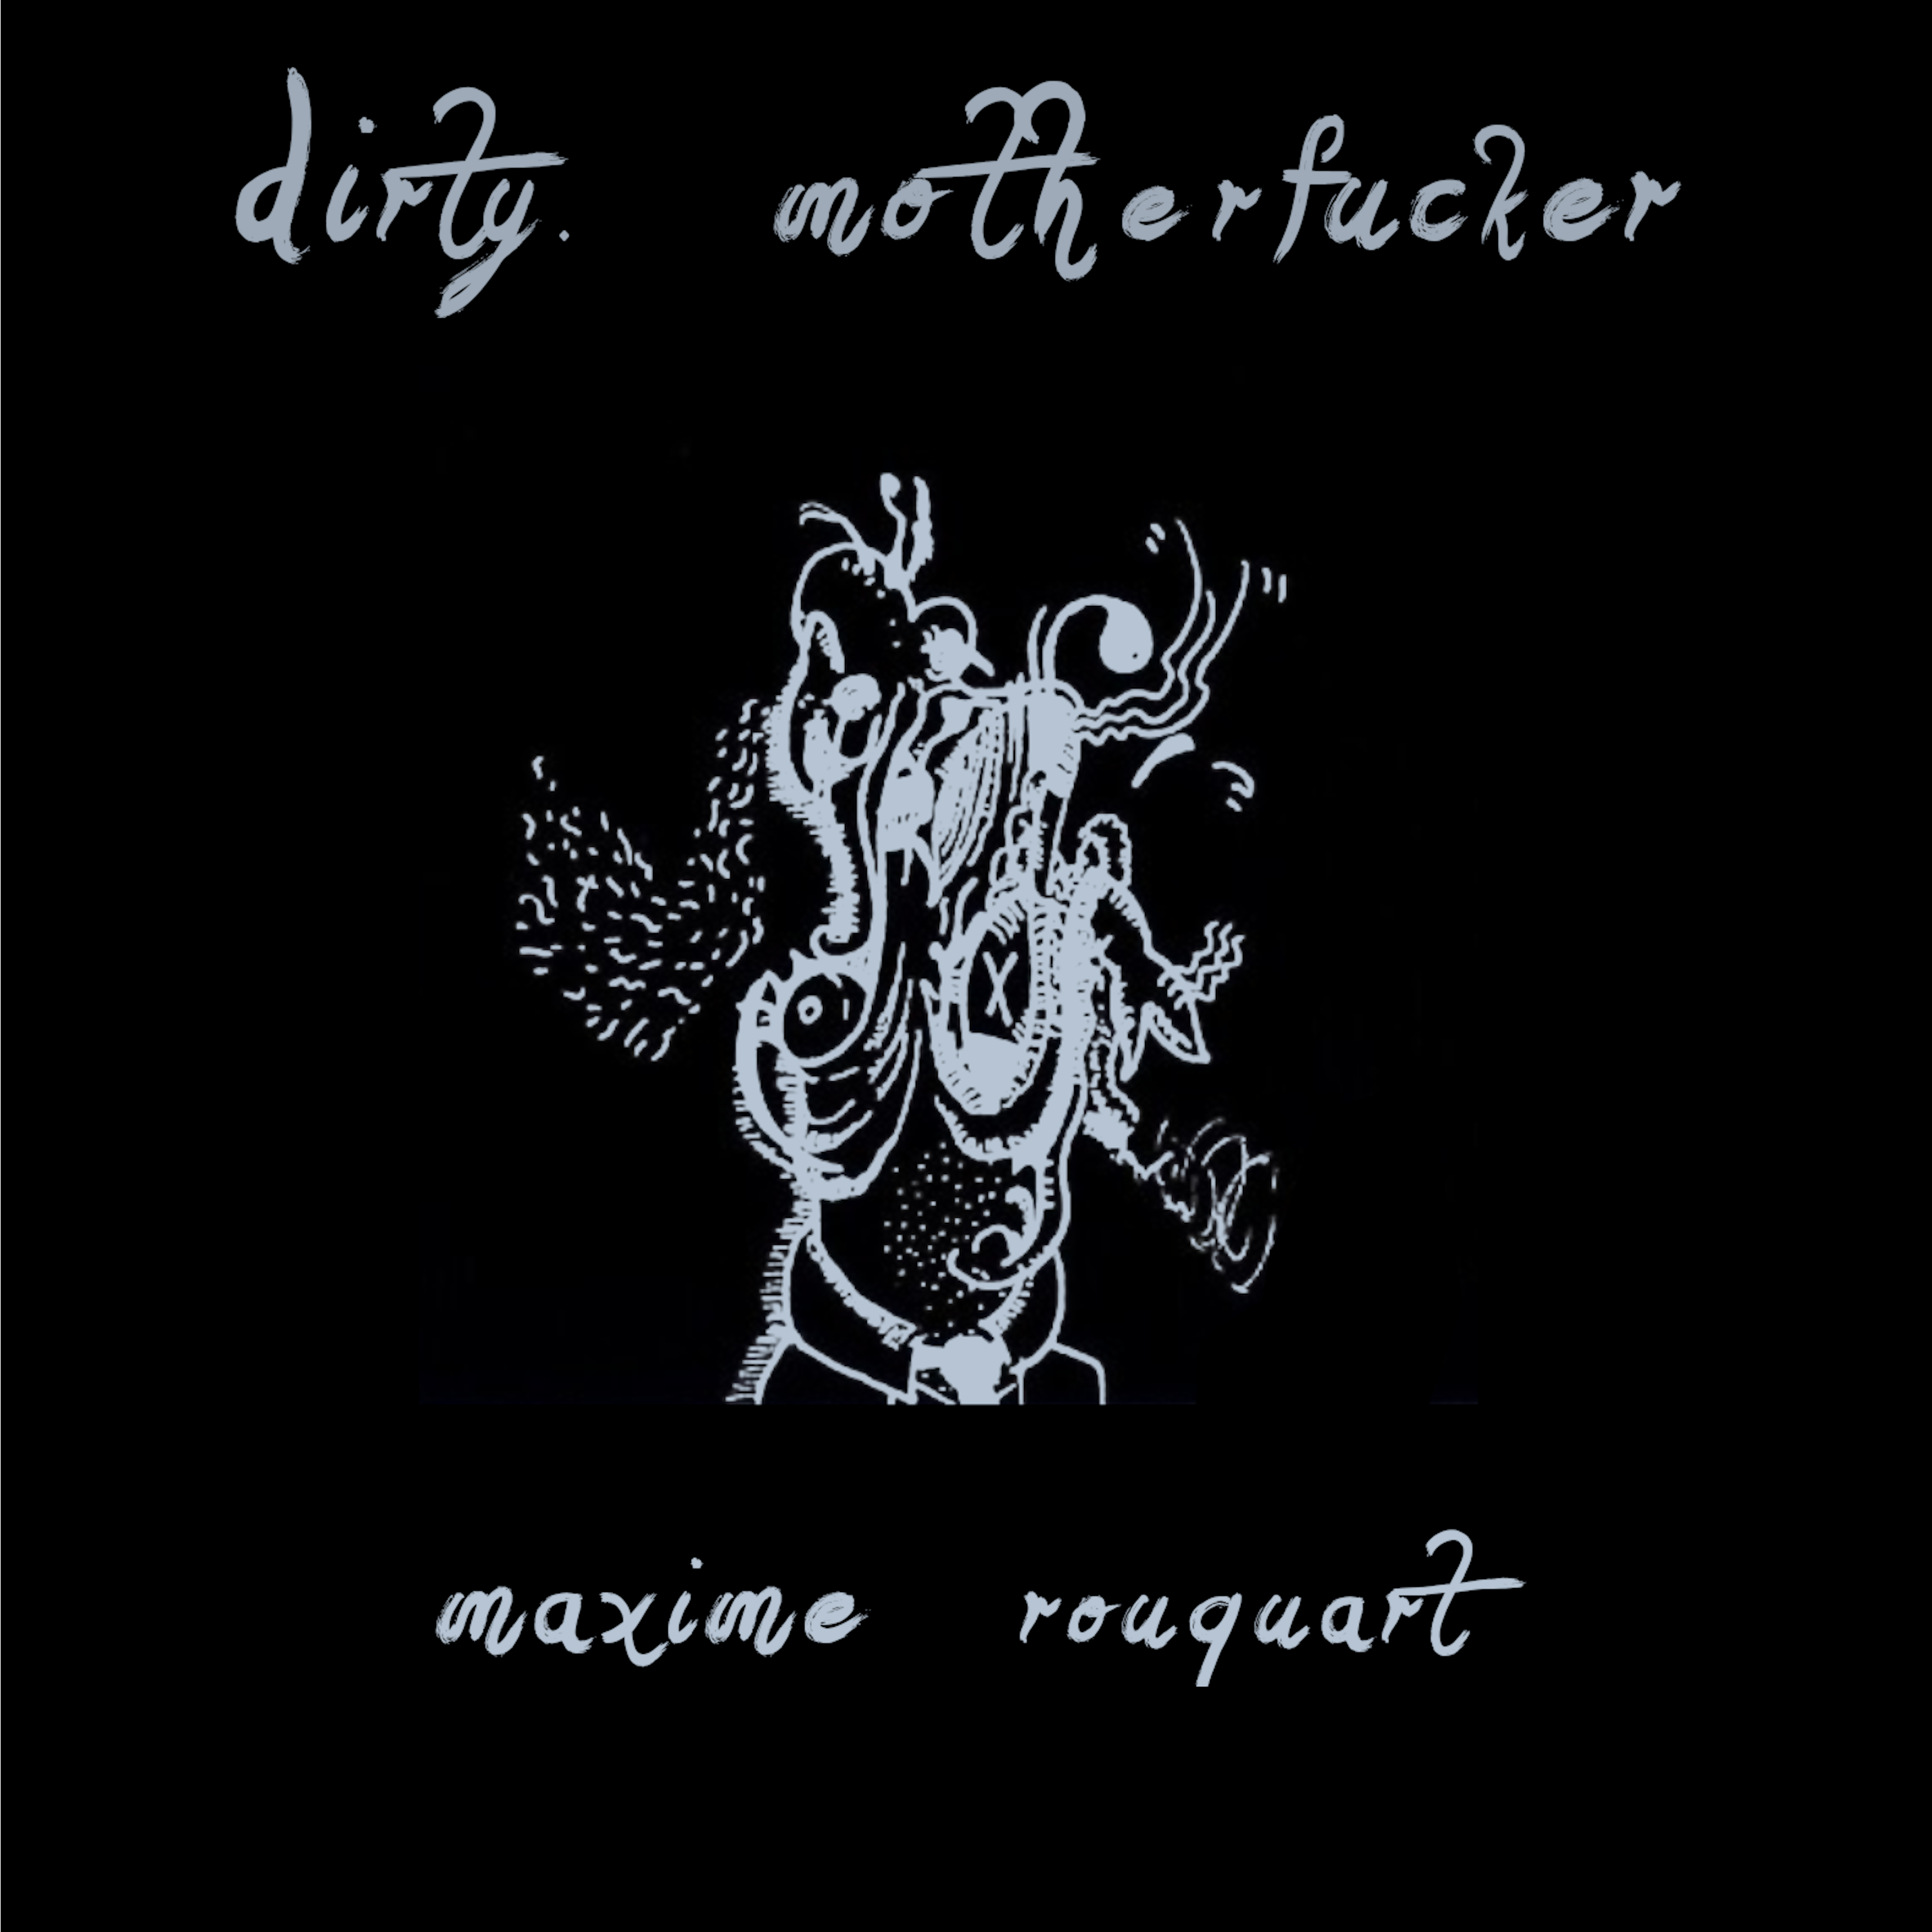 Maxime Rouquart - Dirty Motherfucker front cover